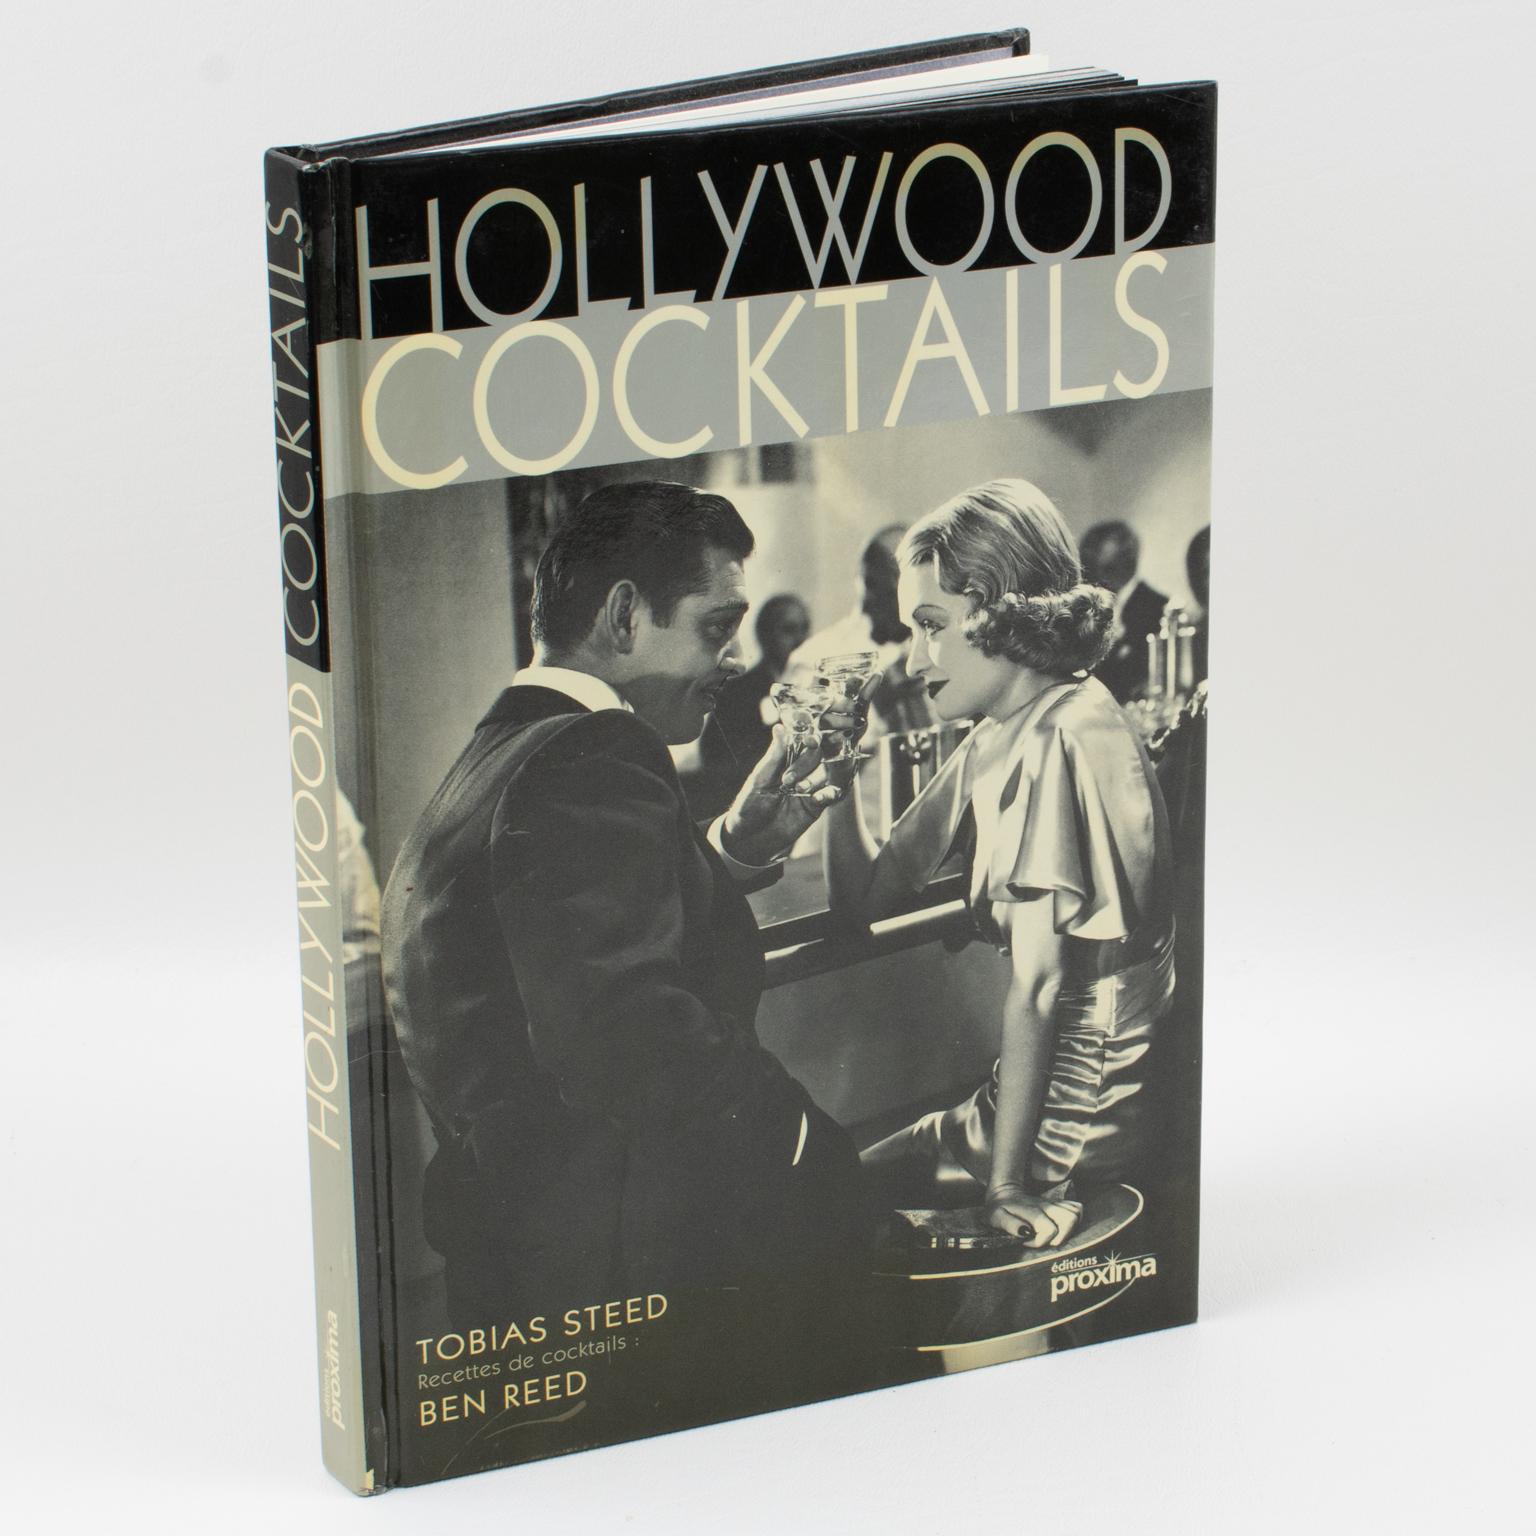 Hollywood Cocktails, by Tobias Steed, French Edition, 1999.
A debonair book about the great era of Hollywood classics and the cocktails typically served in films, from those in Rick's Bar in Casablanca to the vodka martinis in My Man Godfrey. Each